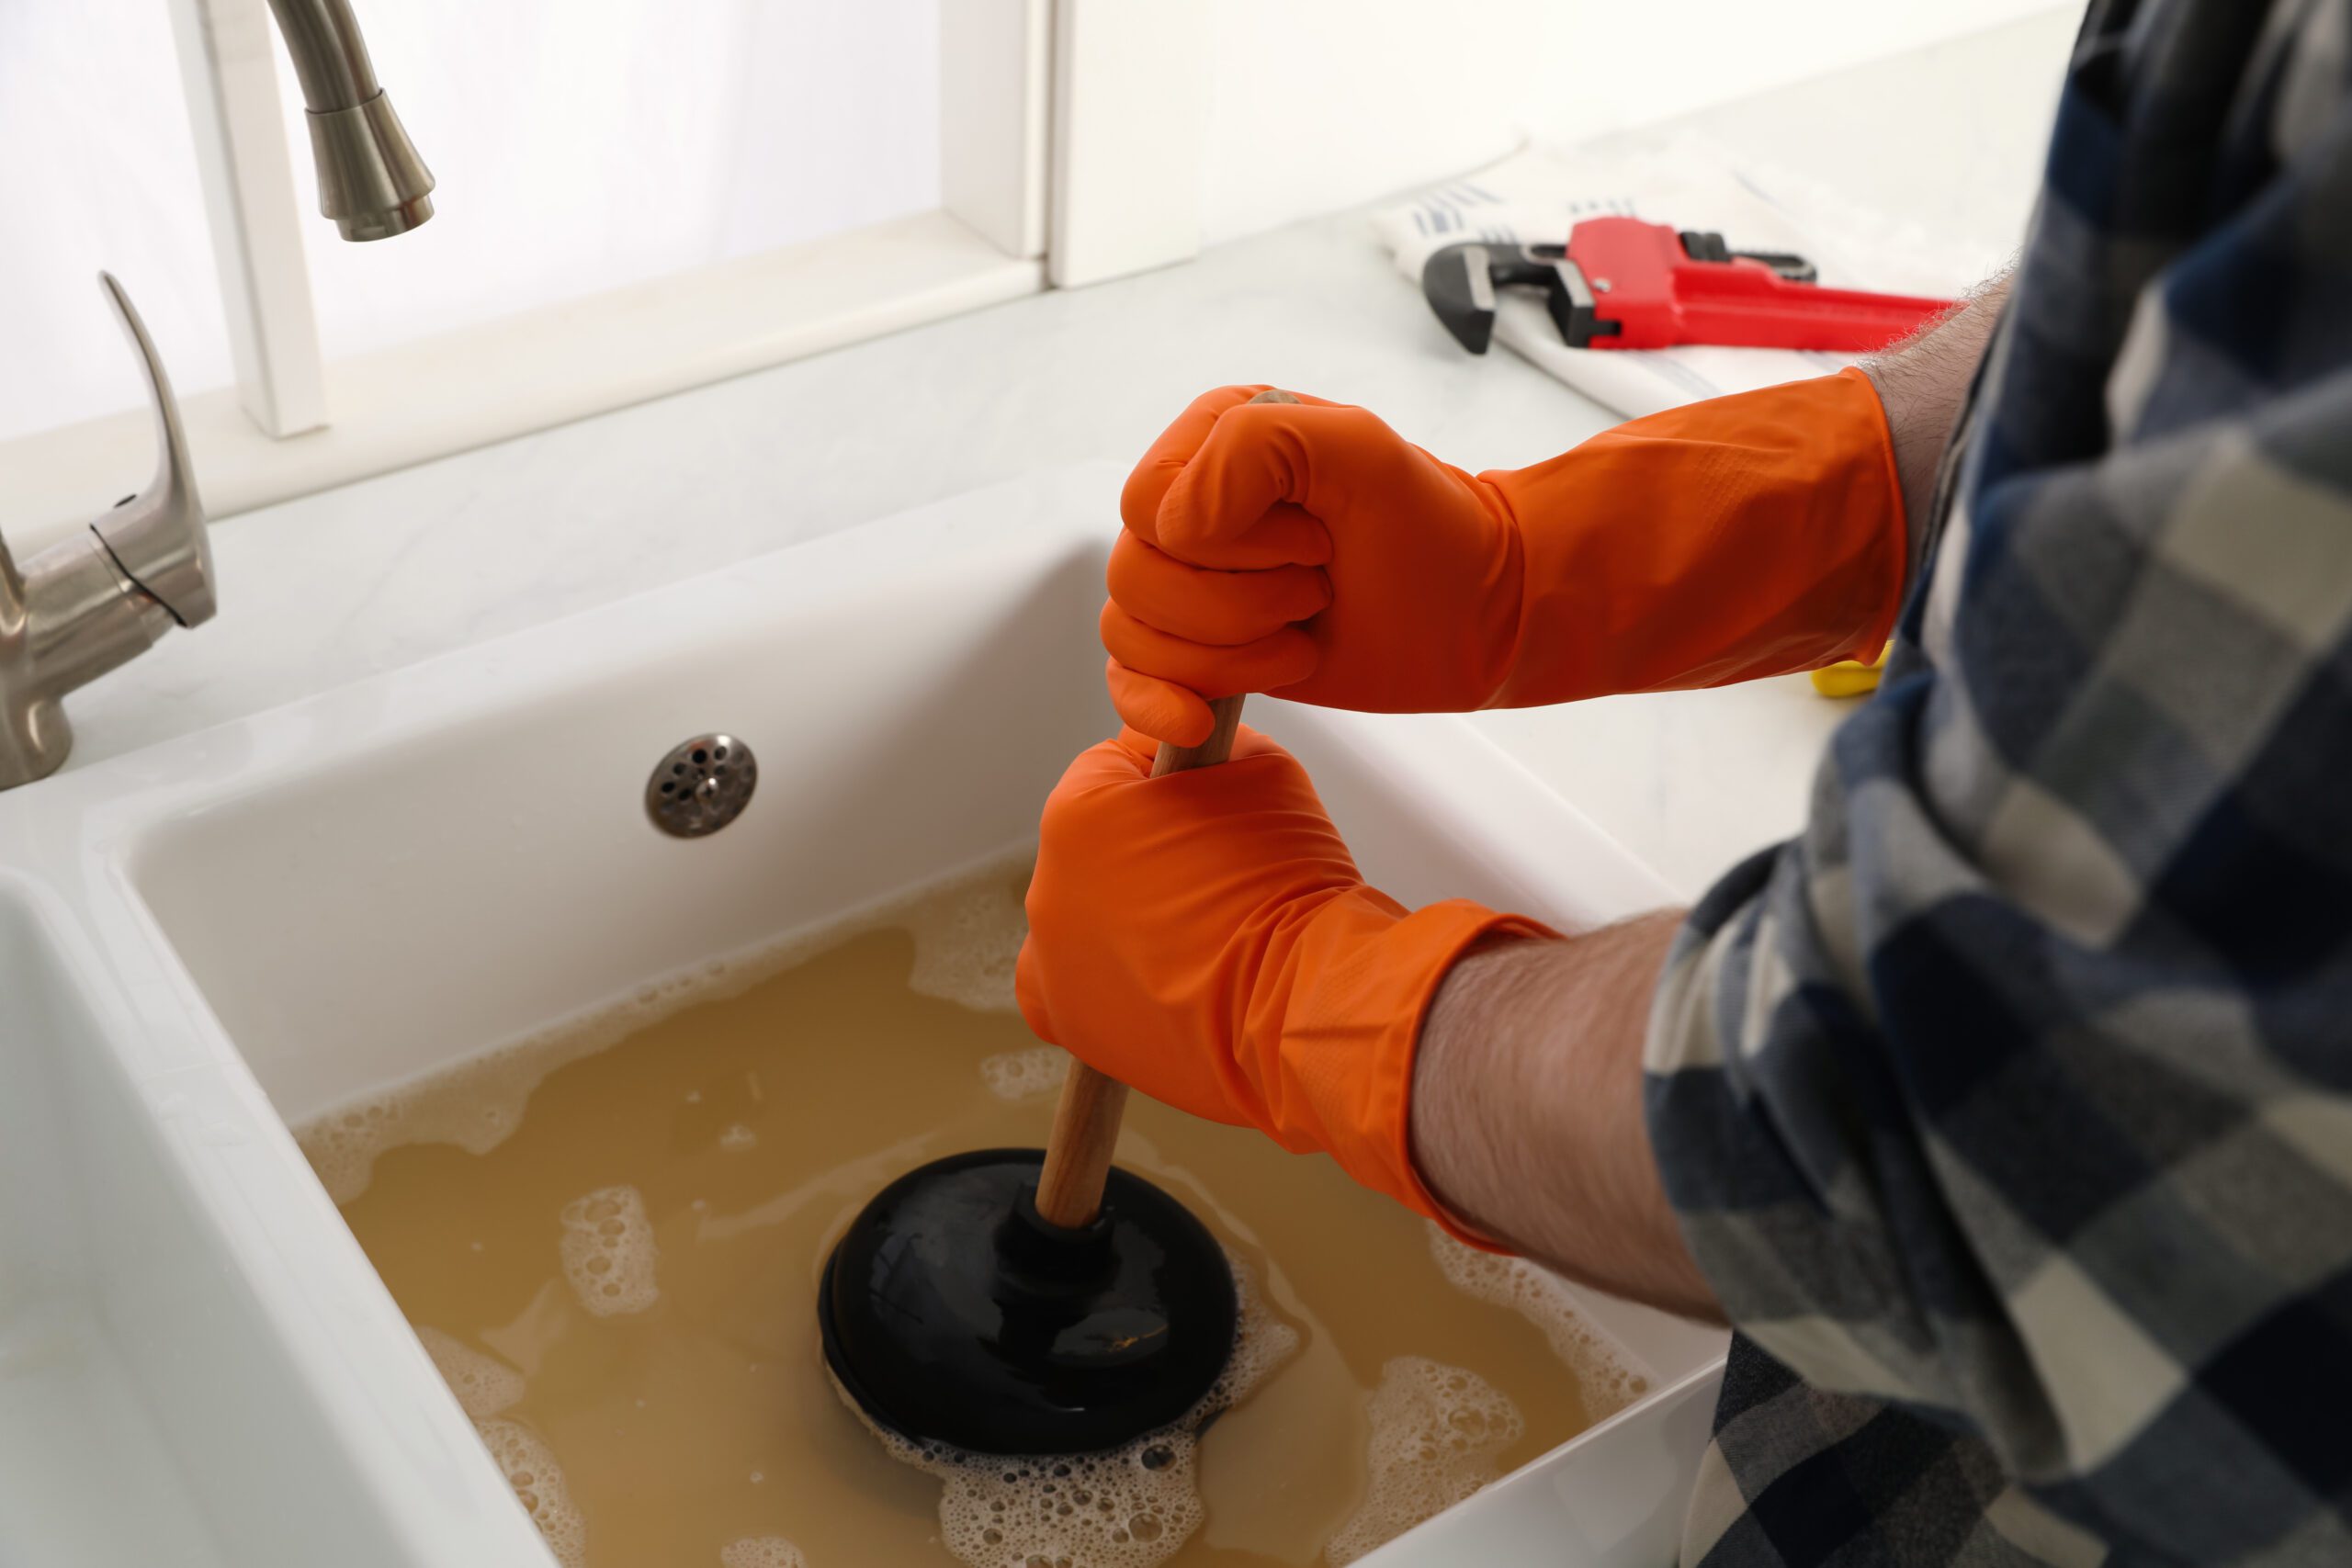 How To Unclog A Sink Without A Plunger